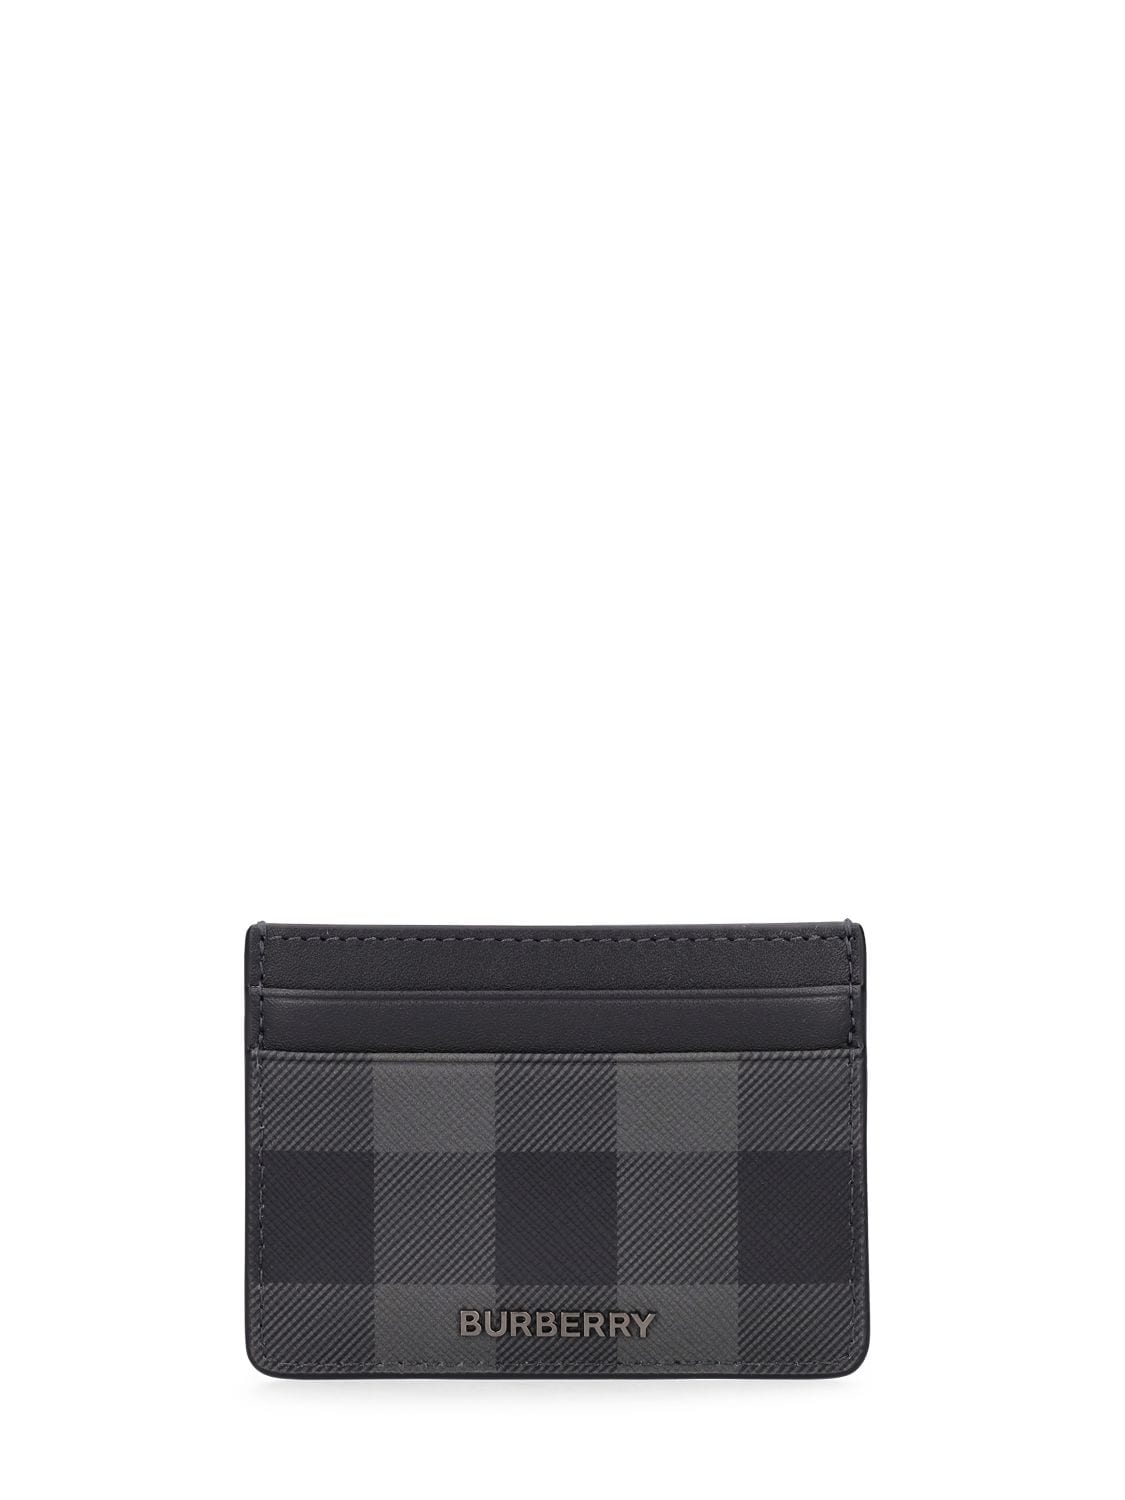 Burberry Sandon Checked Card Holder In Charcoal